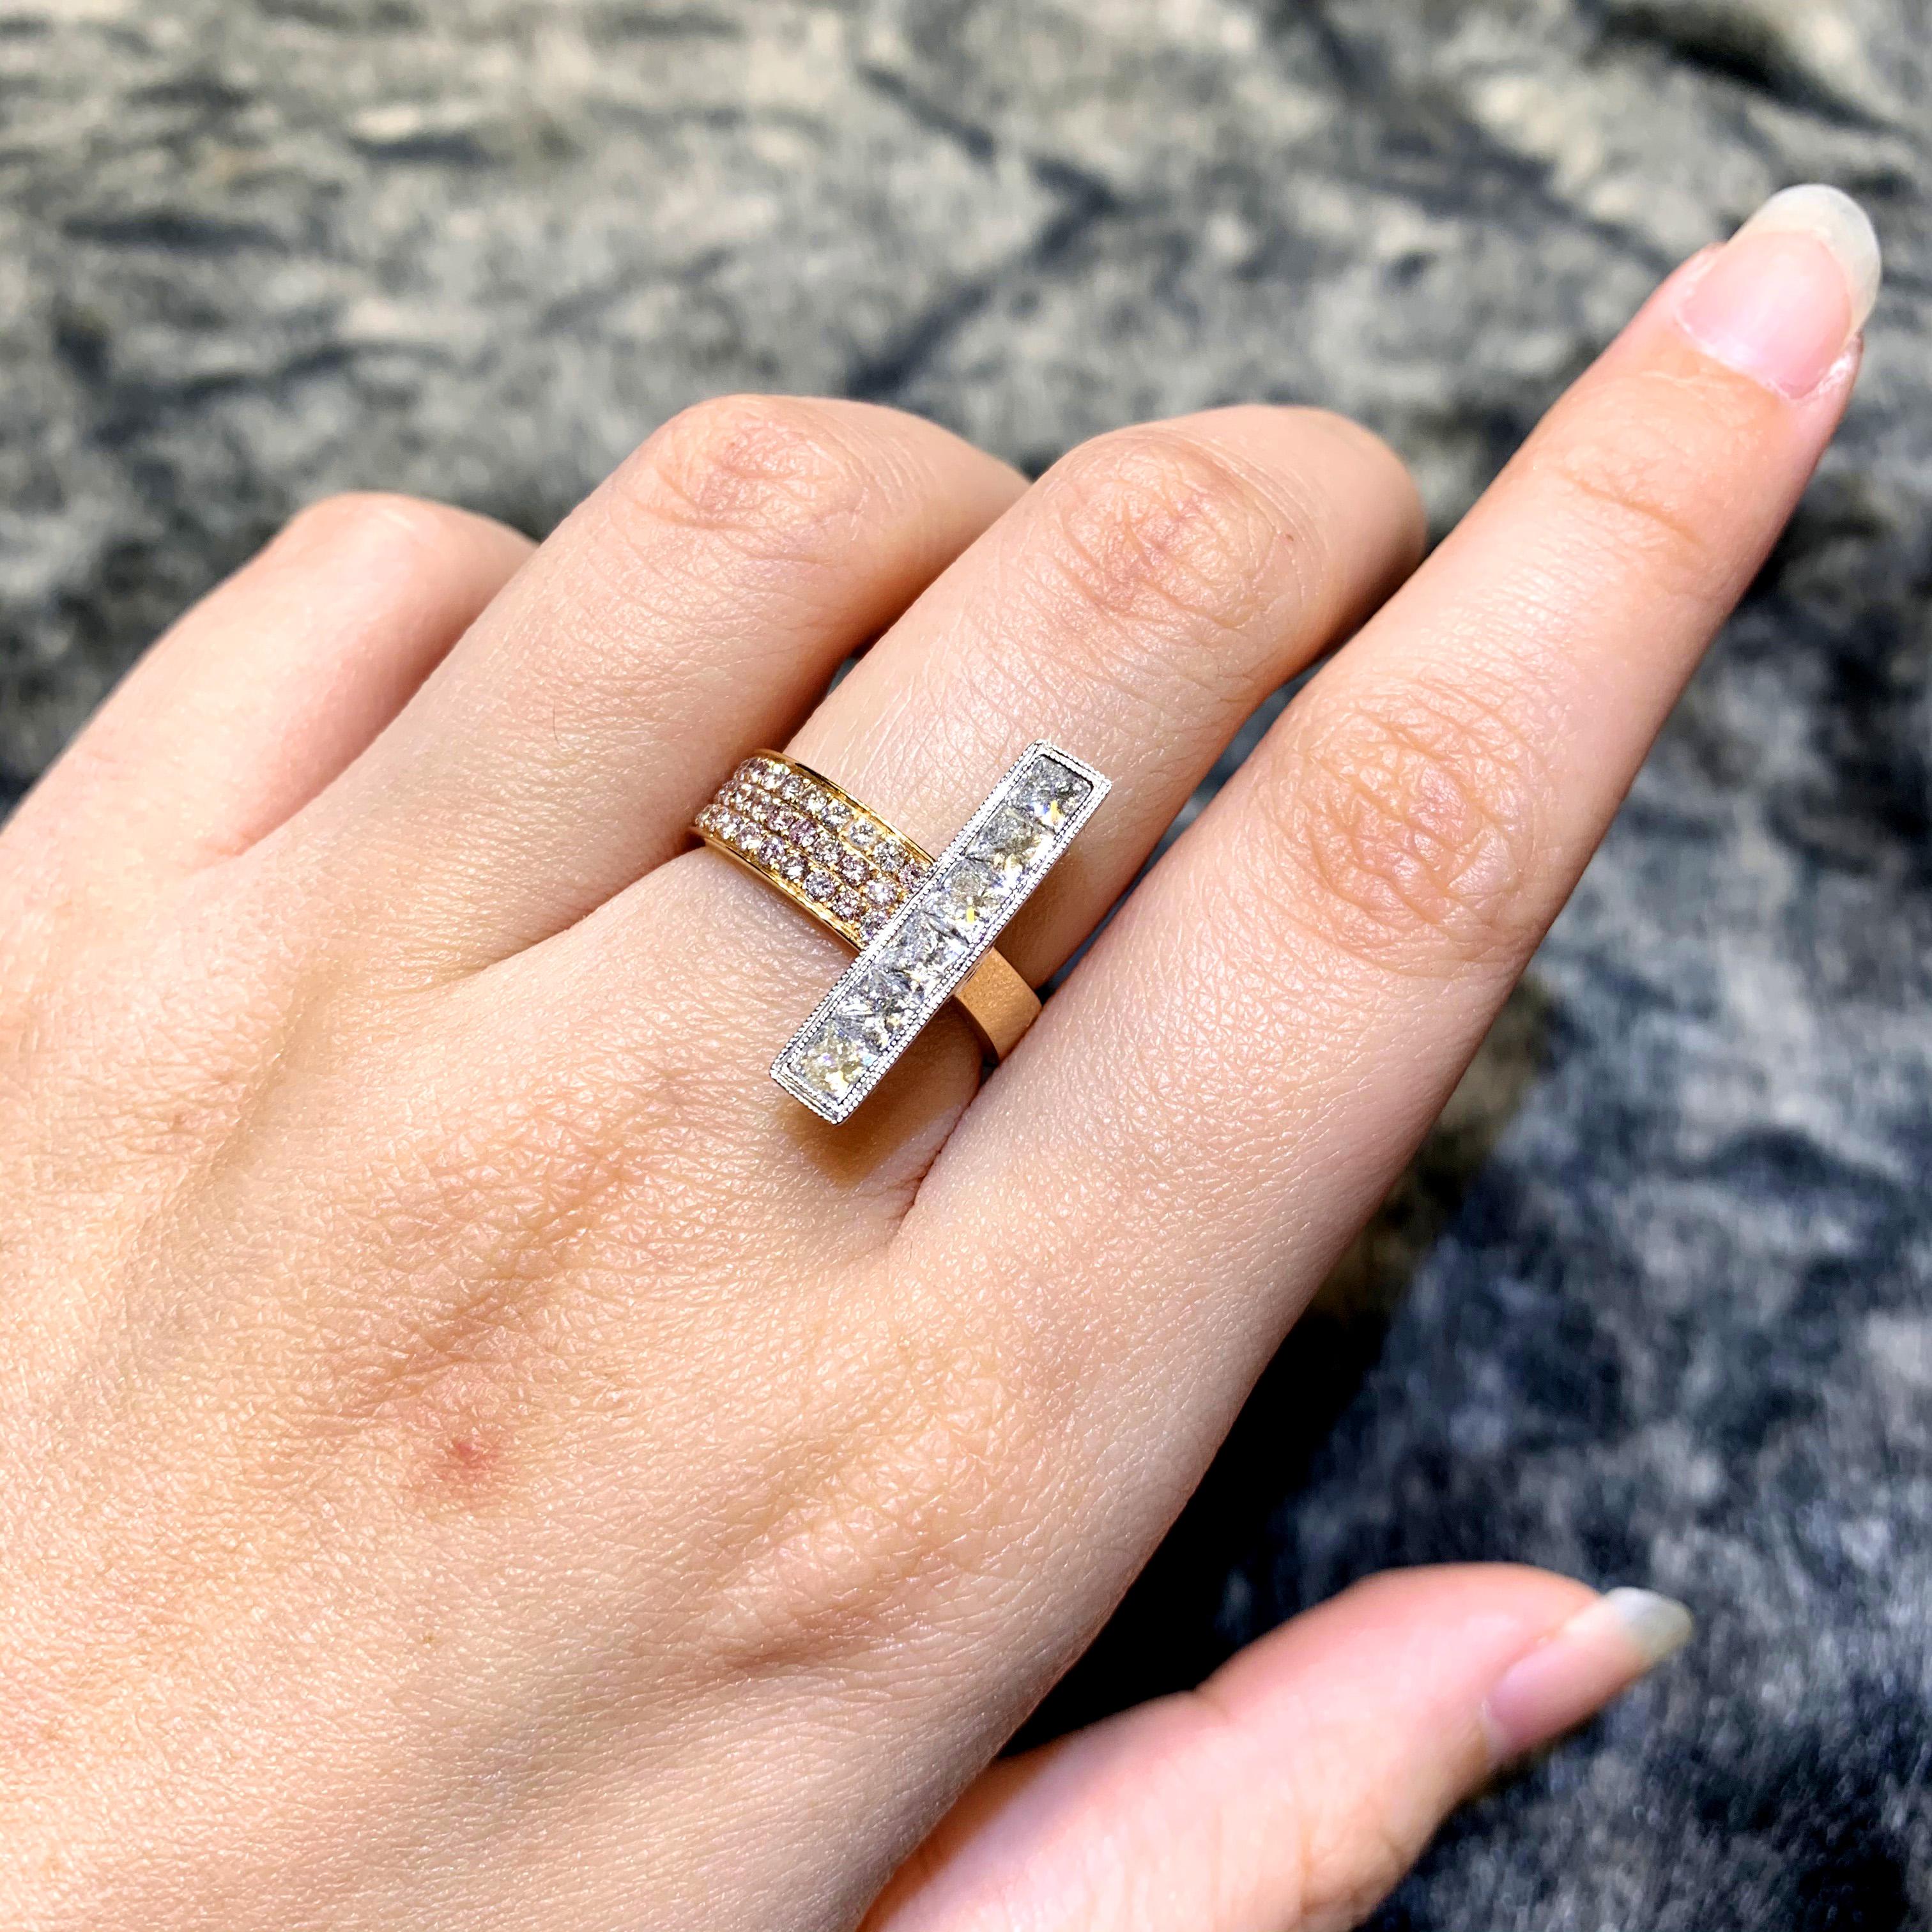 Normally in a band ring, diamonds are set horizontally. But in this ring the diamonds are set vertically with natural fancy pink diamond from Australia. We have used 1.21 carat of white brilliant princess cut diamond. The color is F and clarity is